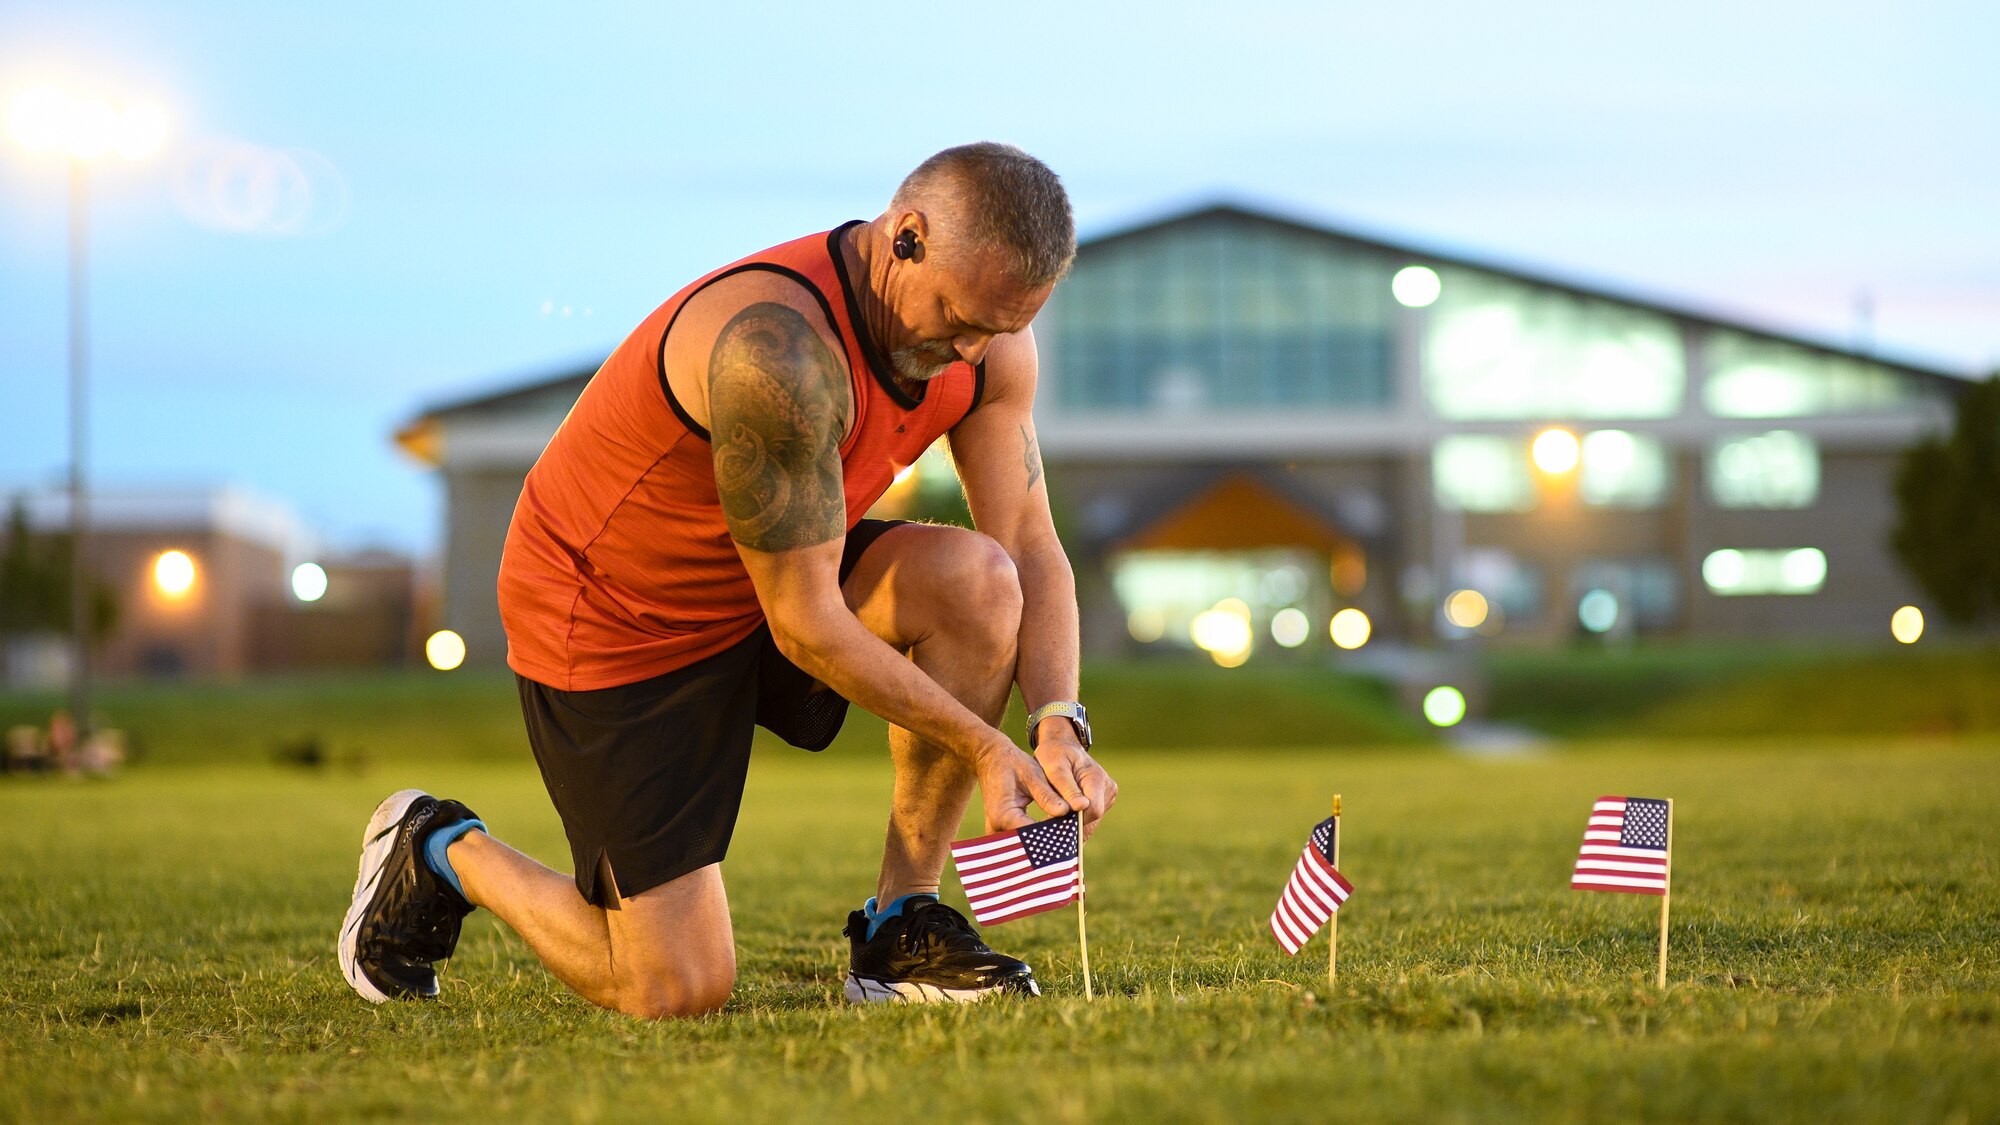 Master Sgt. Jared Barrett places a flag during a Suicide Awareness Prevnetion Month 5K ruck march/run at Hill Air Force Base, Utah, Sept. 25, 2019. Throughout the day and during the ruck march/run, Airmen placed flags in remembrance of a family member, friend or coworker who died by suicide. (U.S. Air Force photo by R. Nial Bradshaw)